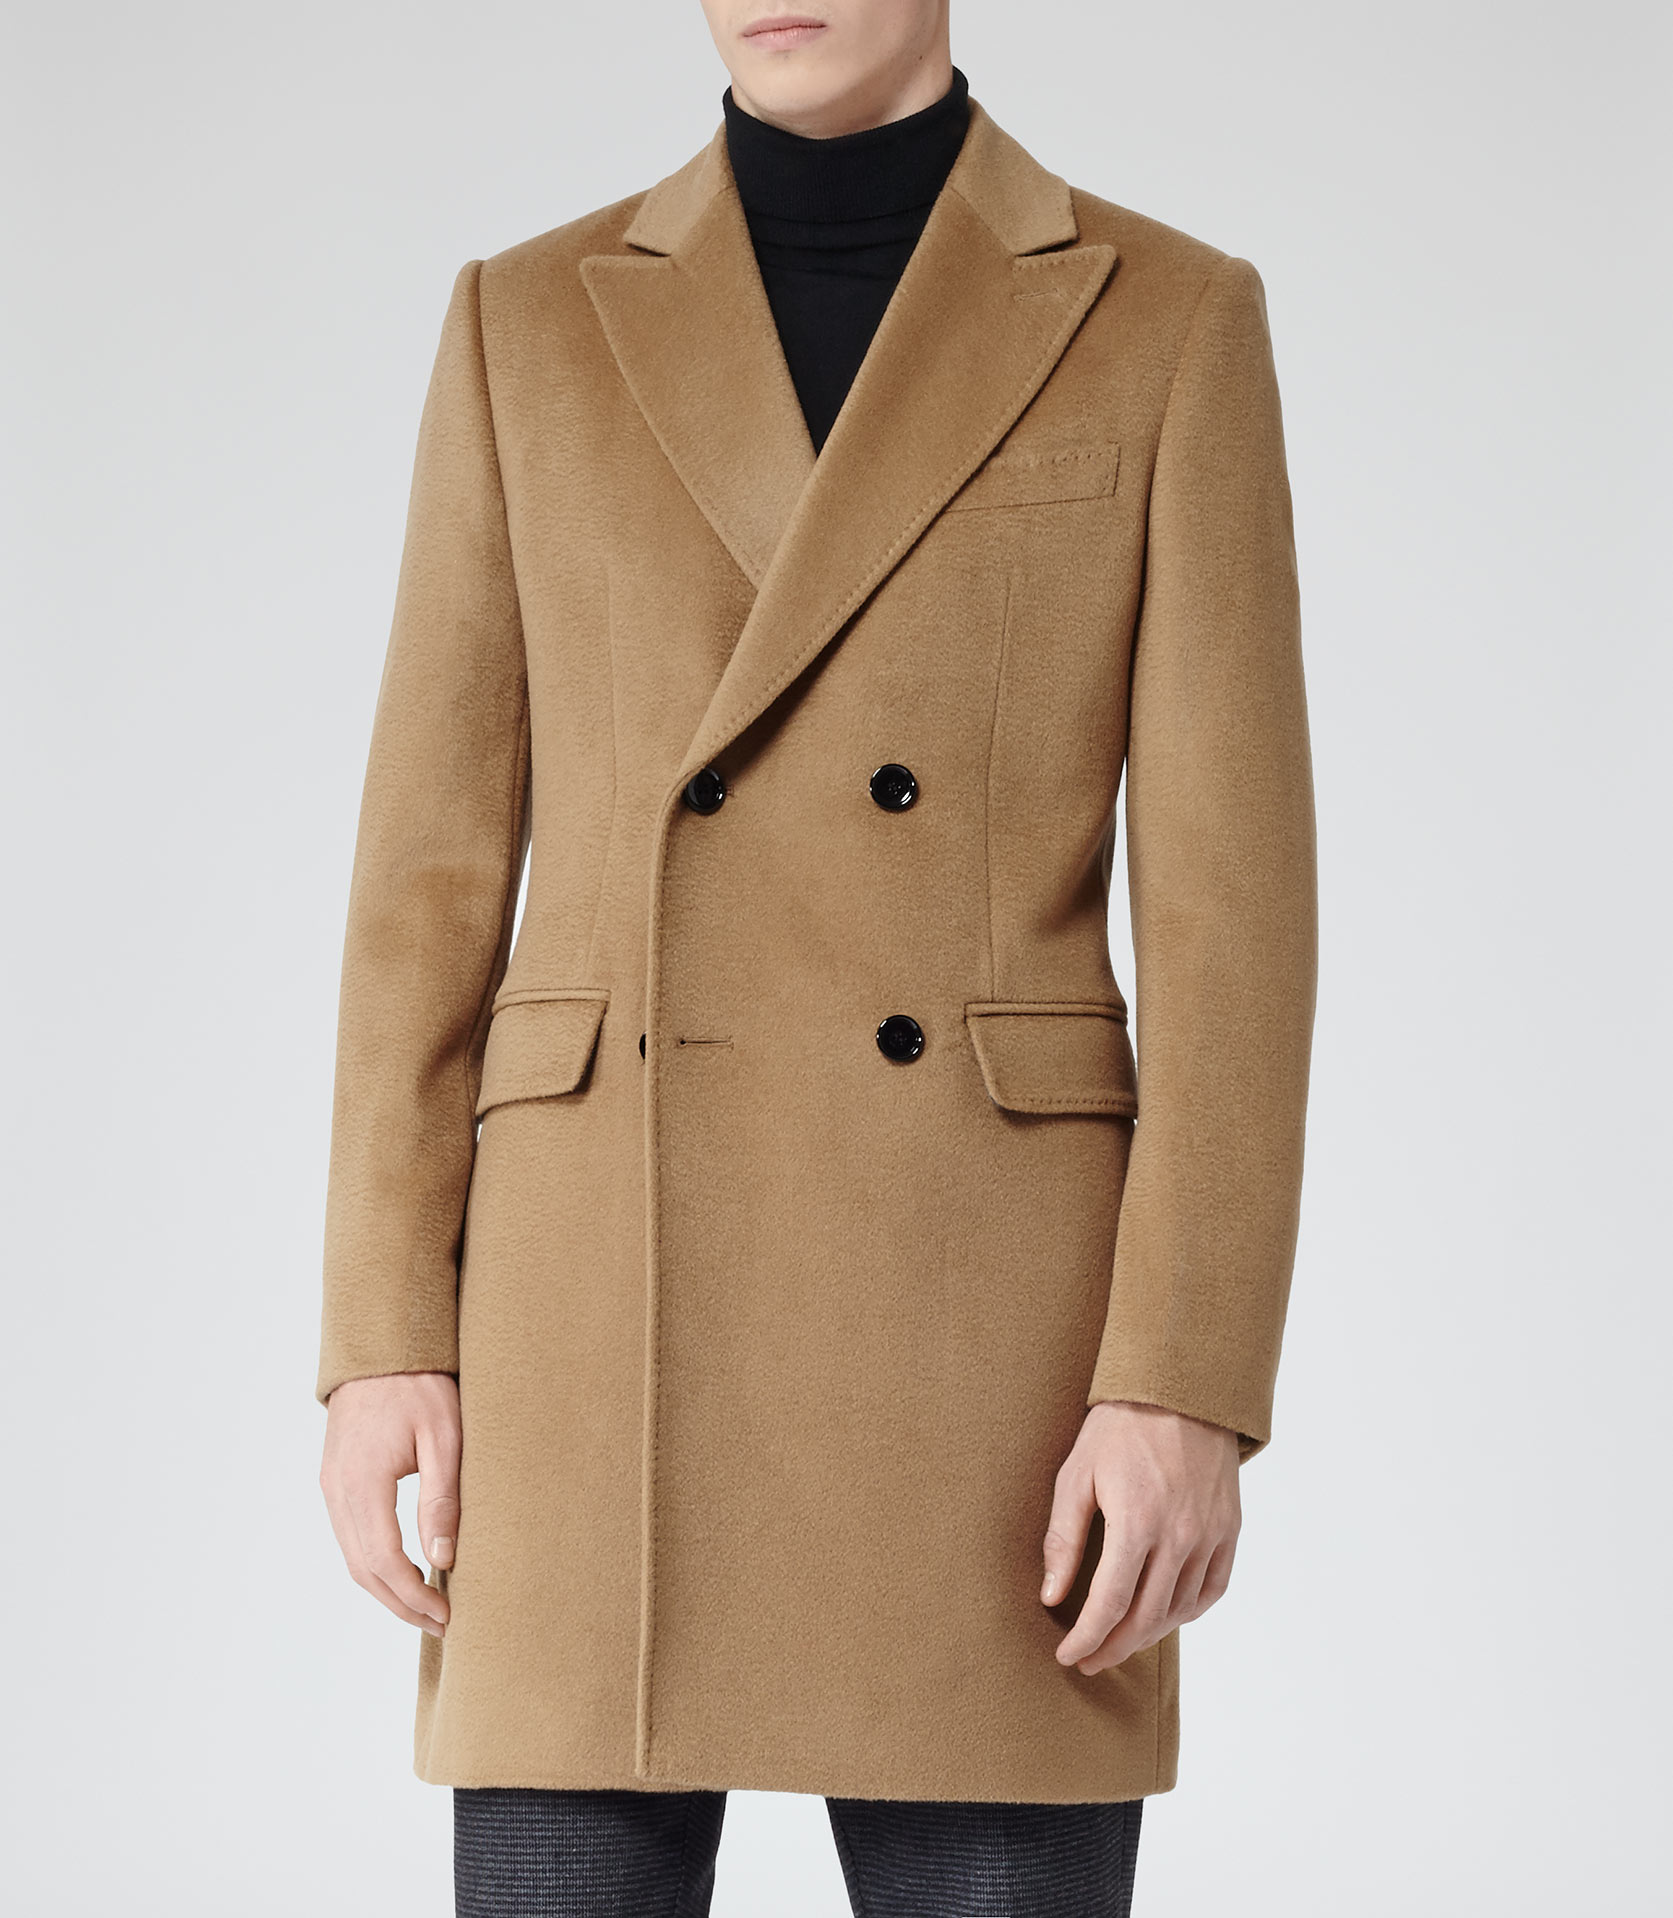 Reiss Kanye Double Breasted Coat Lapel in Brown for Men - Lyst